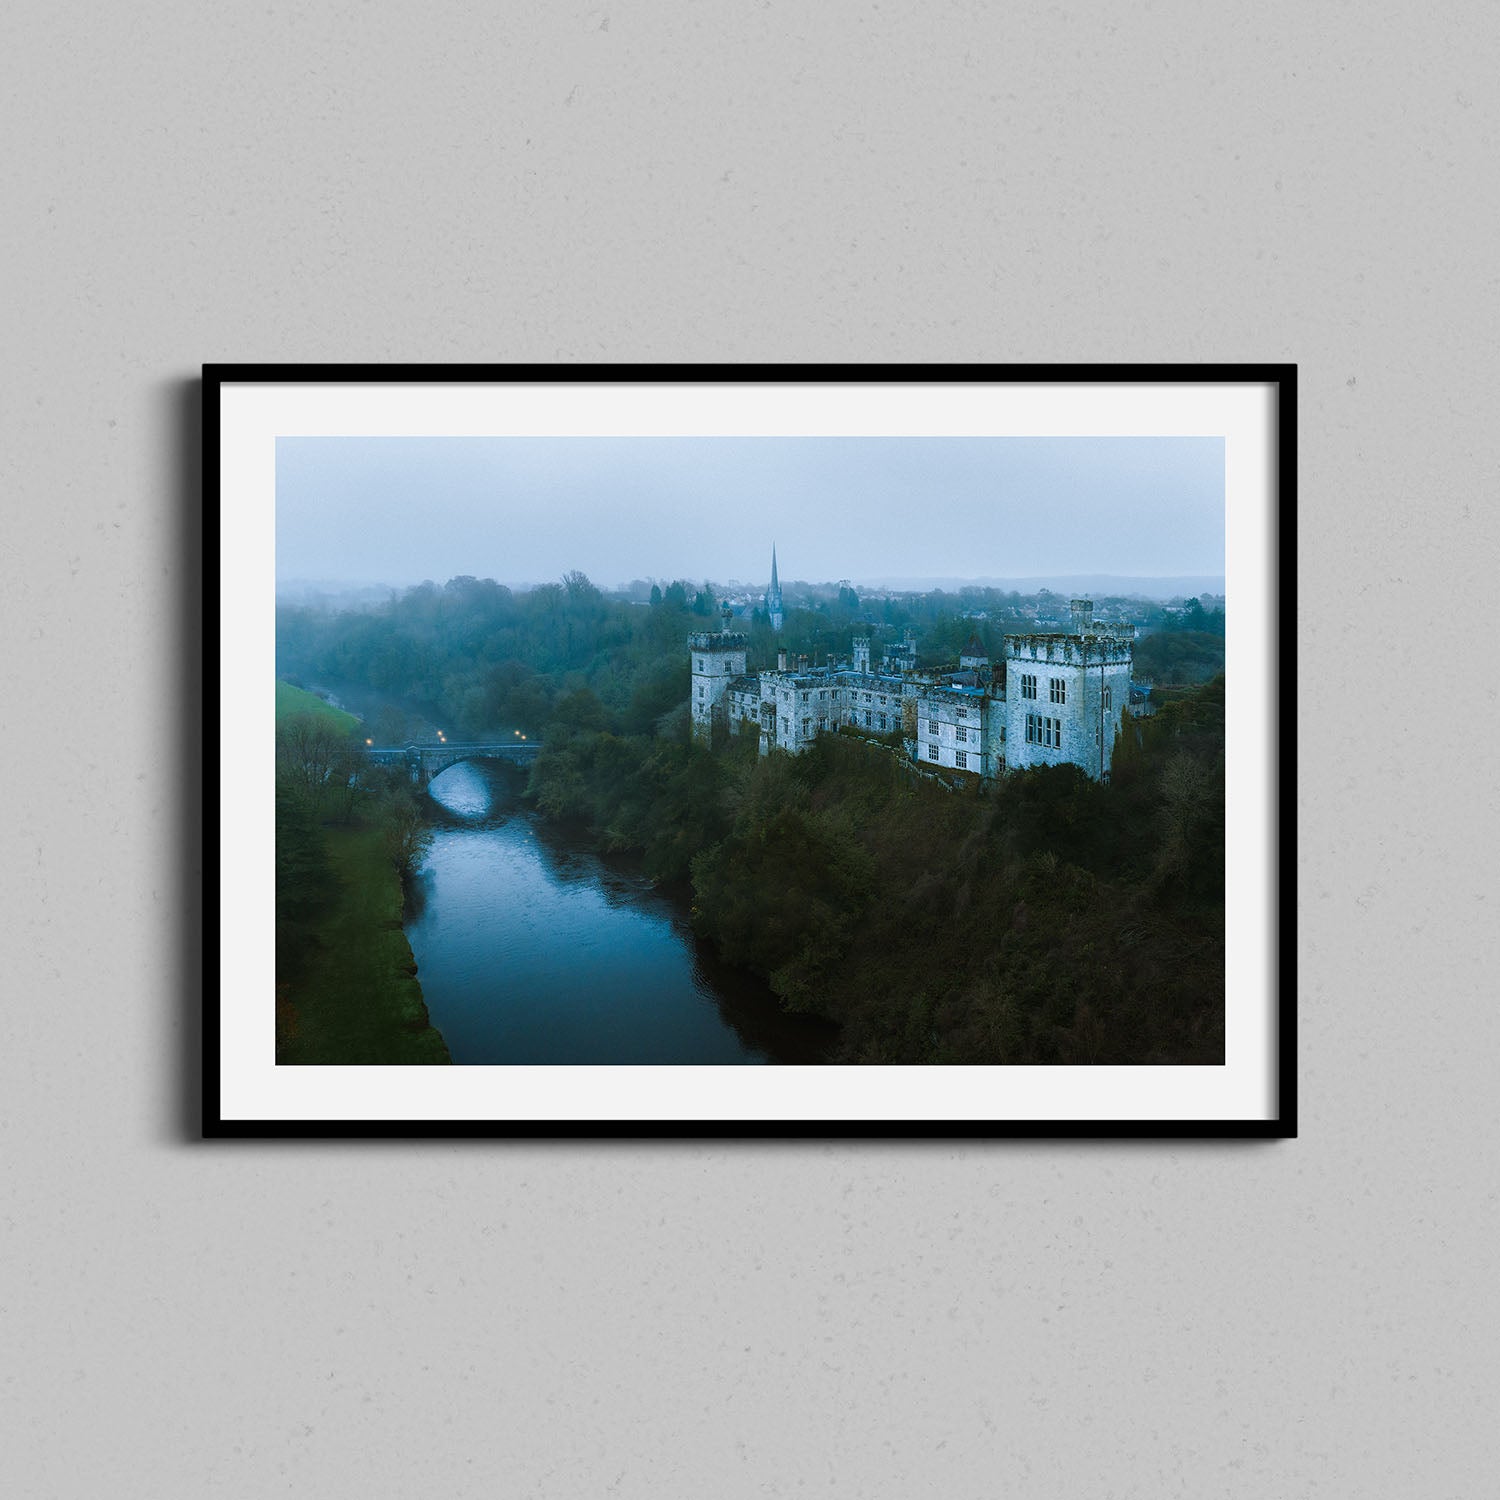 Lismore Castle and River Blackwater Ireland Print